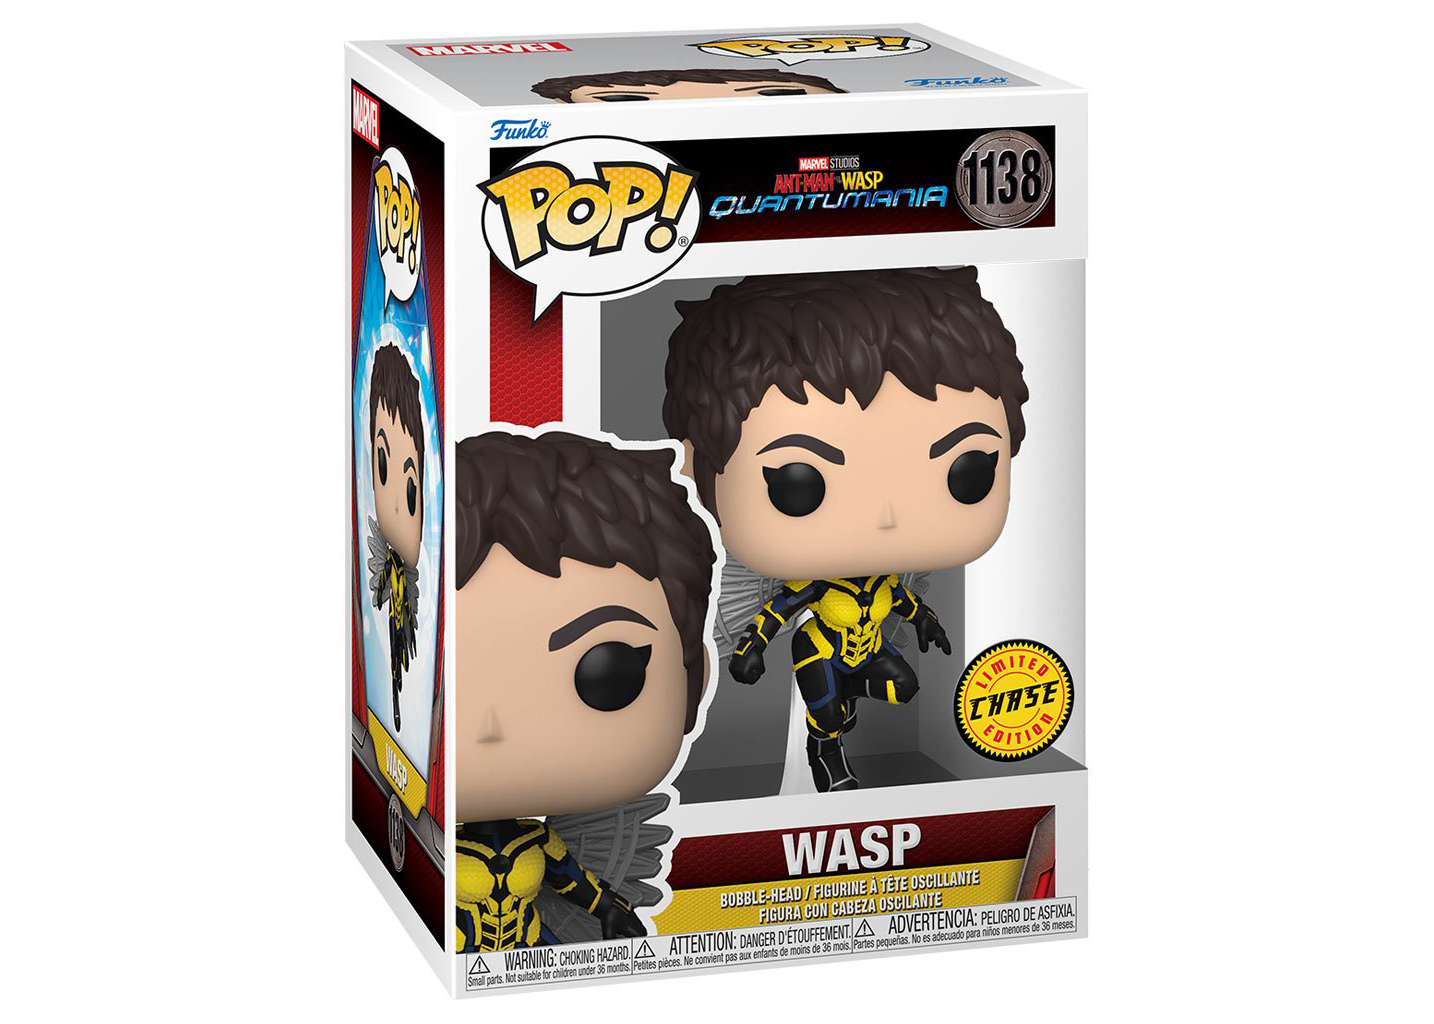 Funko Pop! Marvel Studios Ant-Man and the Wasp Quantumania Wasp Chase  Edition Figure #1138